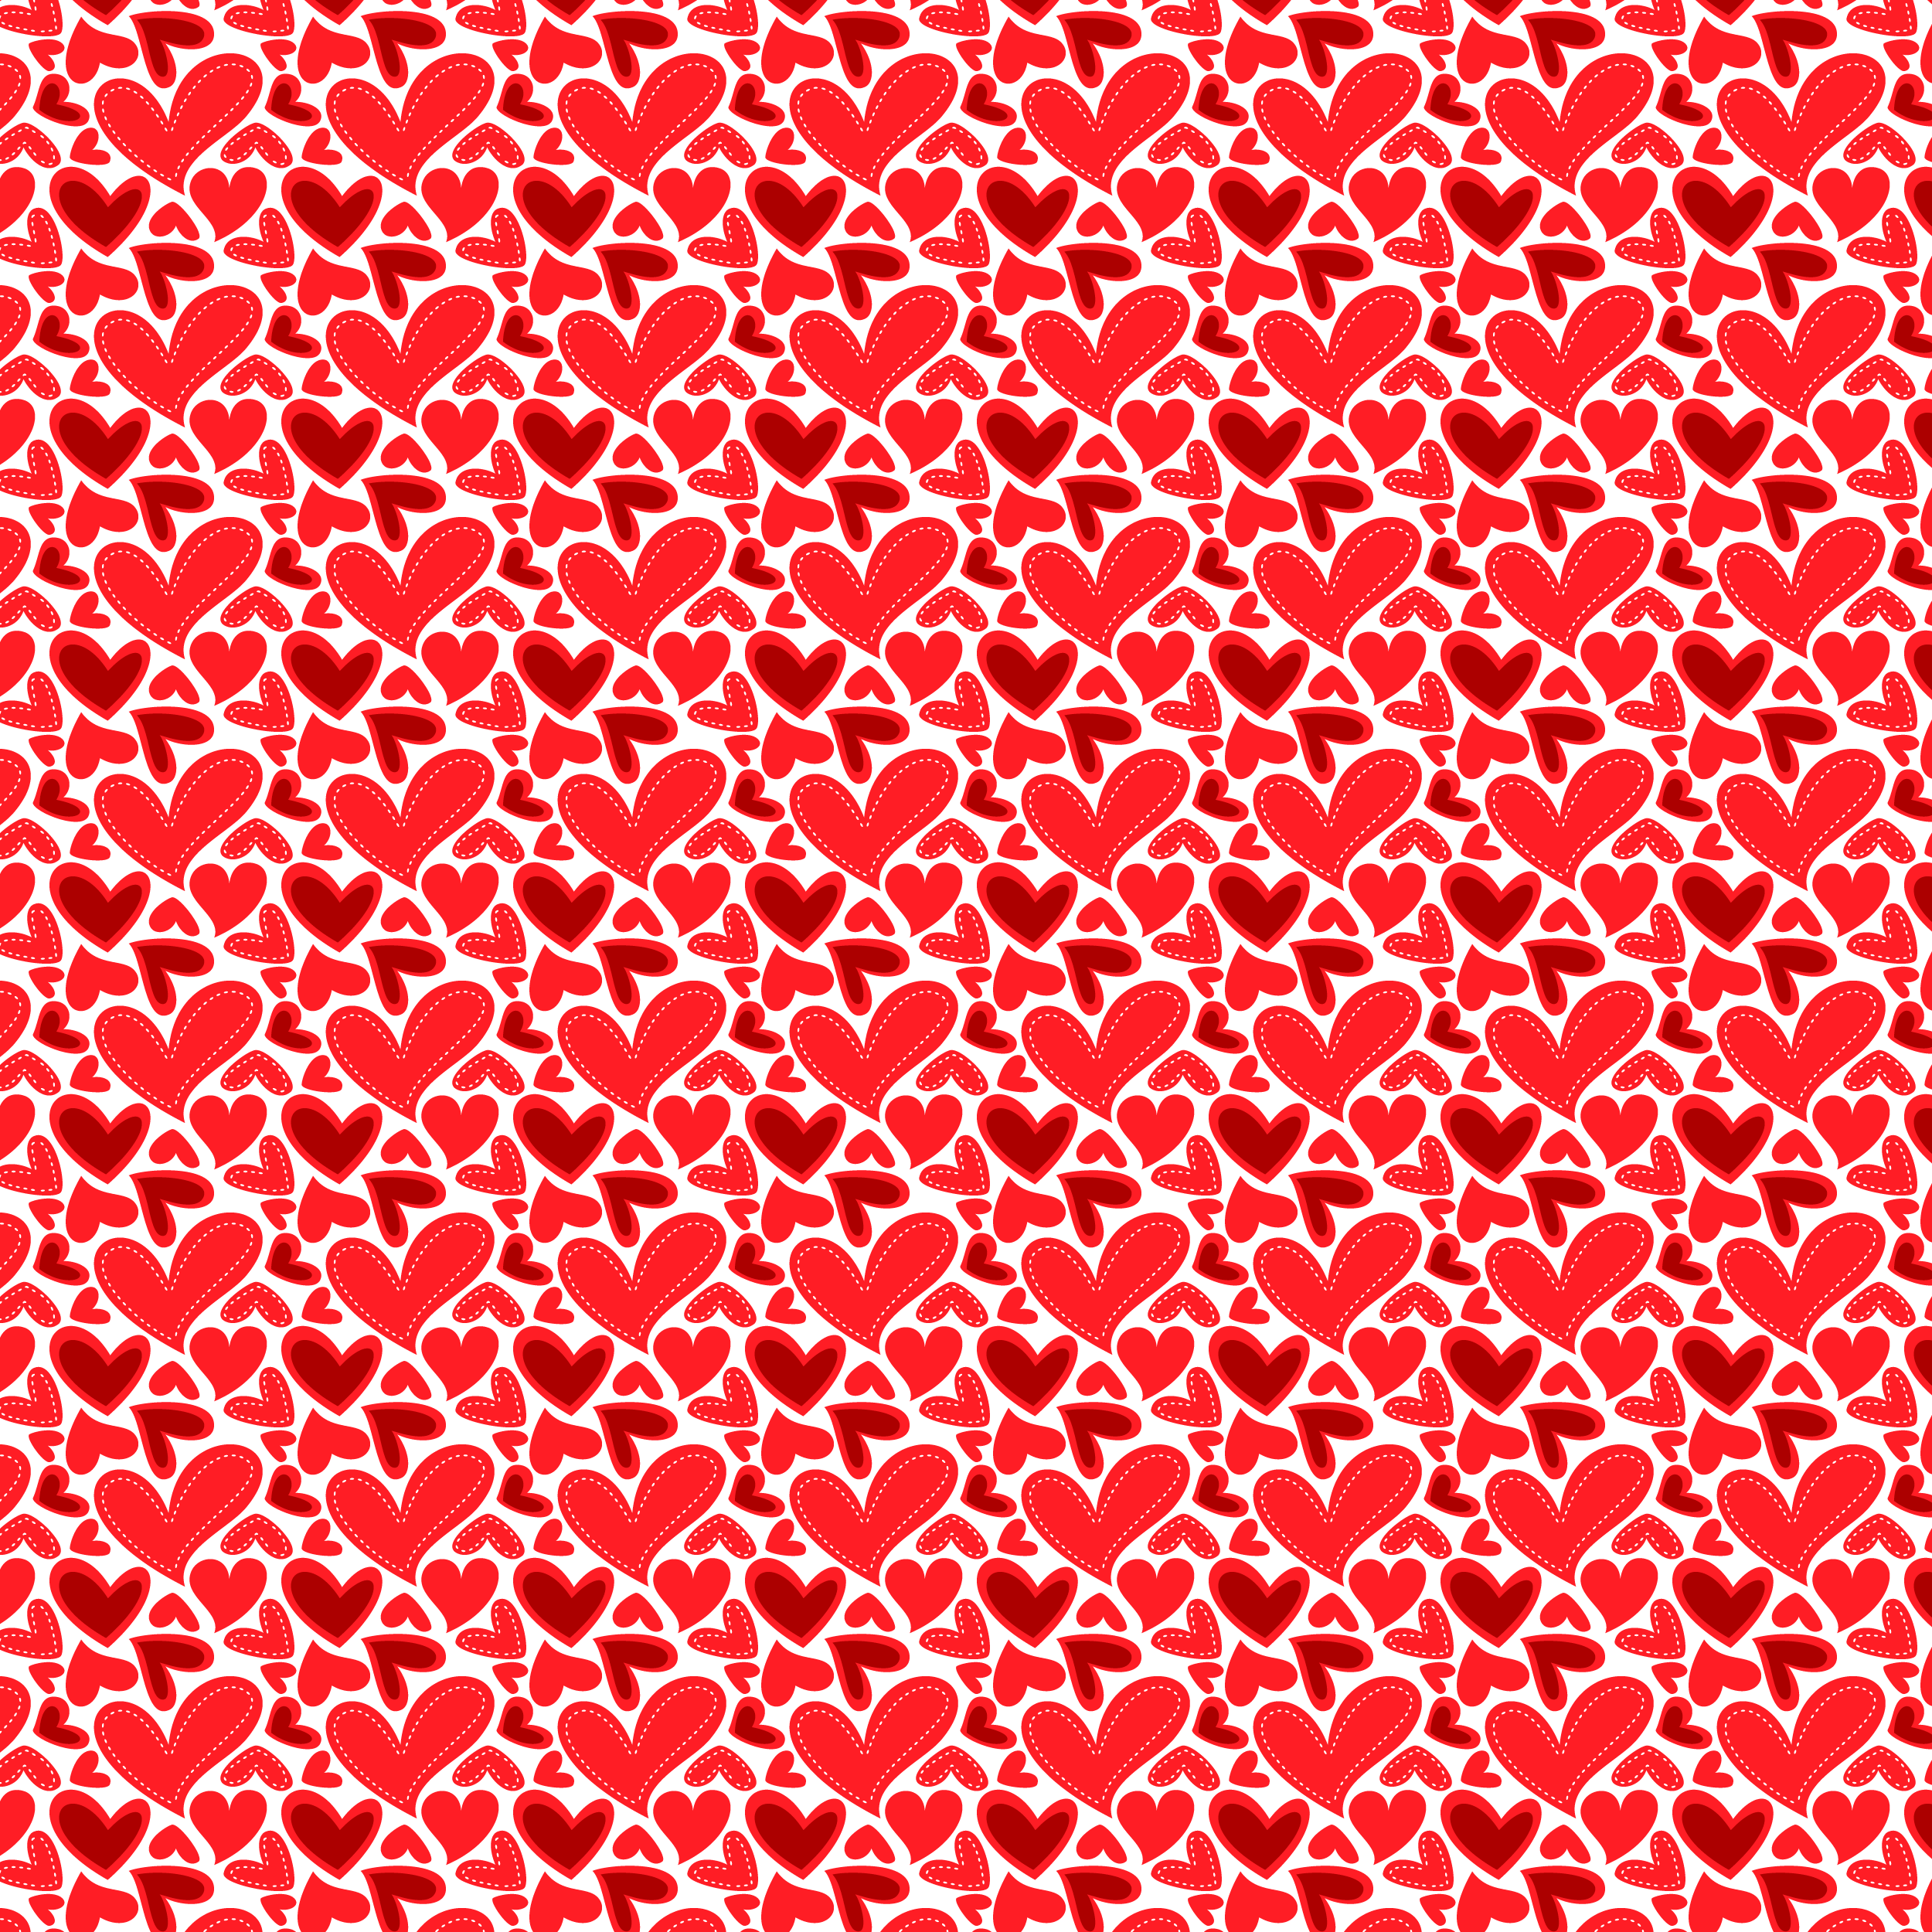 FabNFree-3111-StitchyHearts-Red-Paper